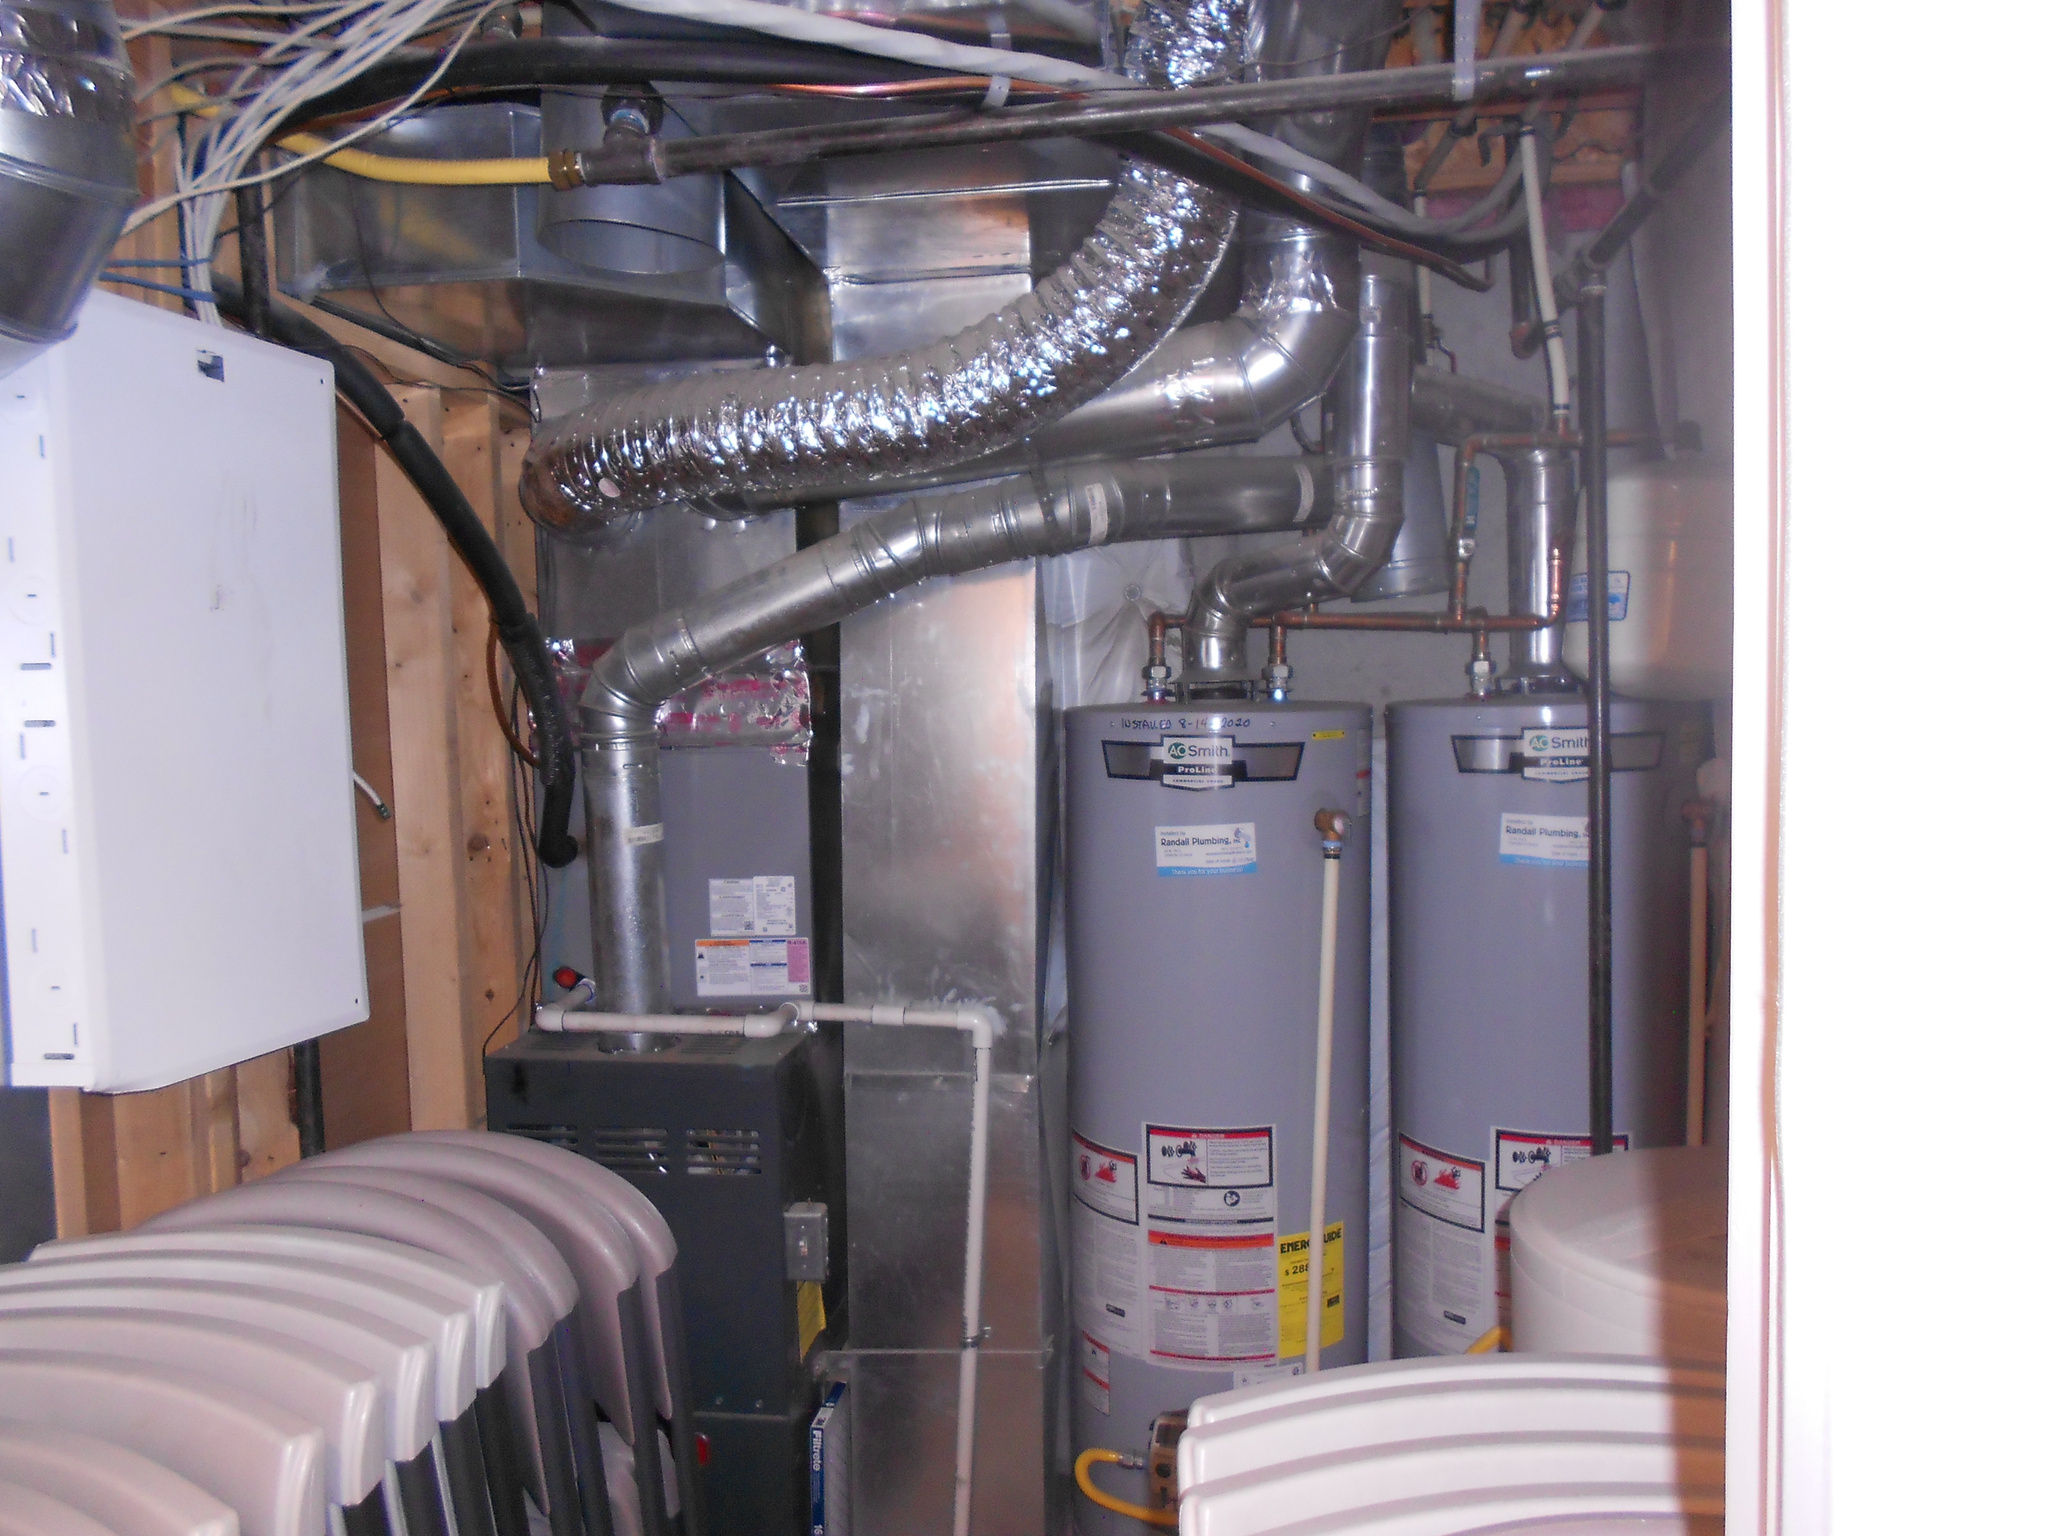 Utility Room with 2 Newer 50 Gallon Water Heaters/Furnace and Water Softener